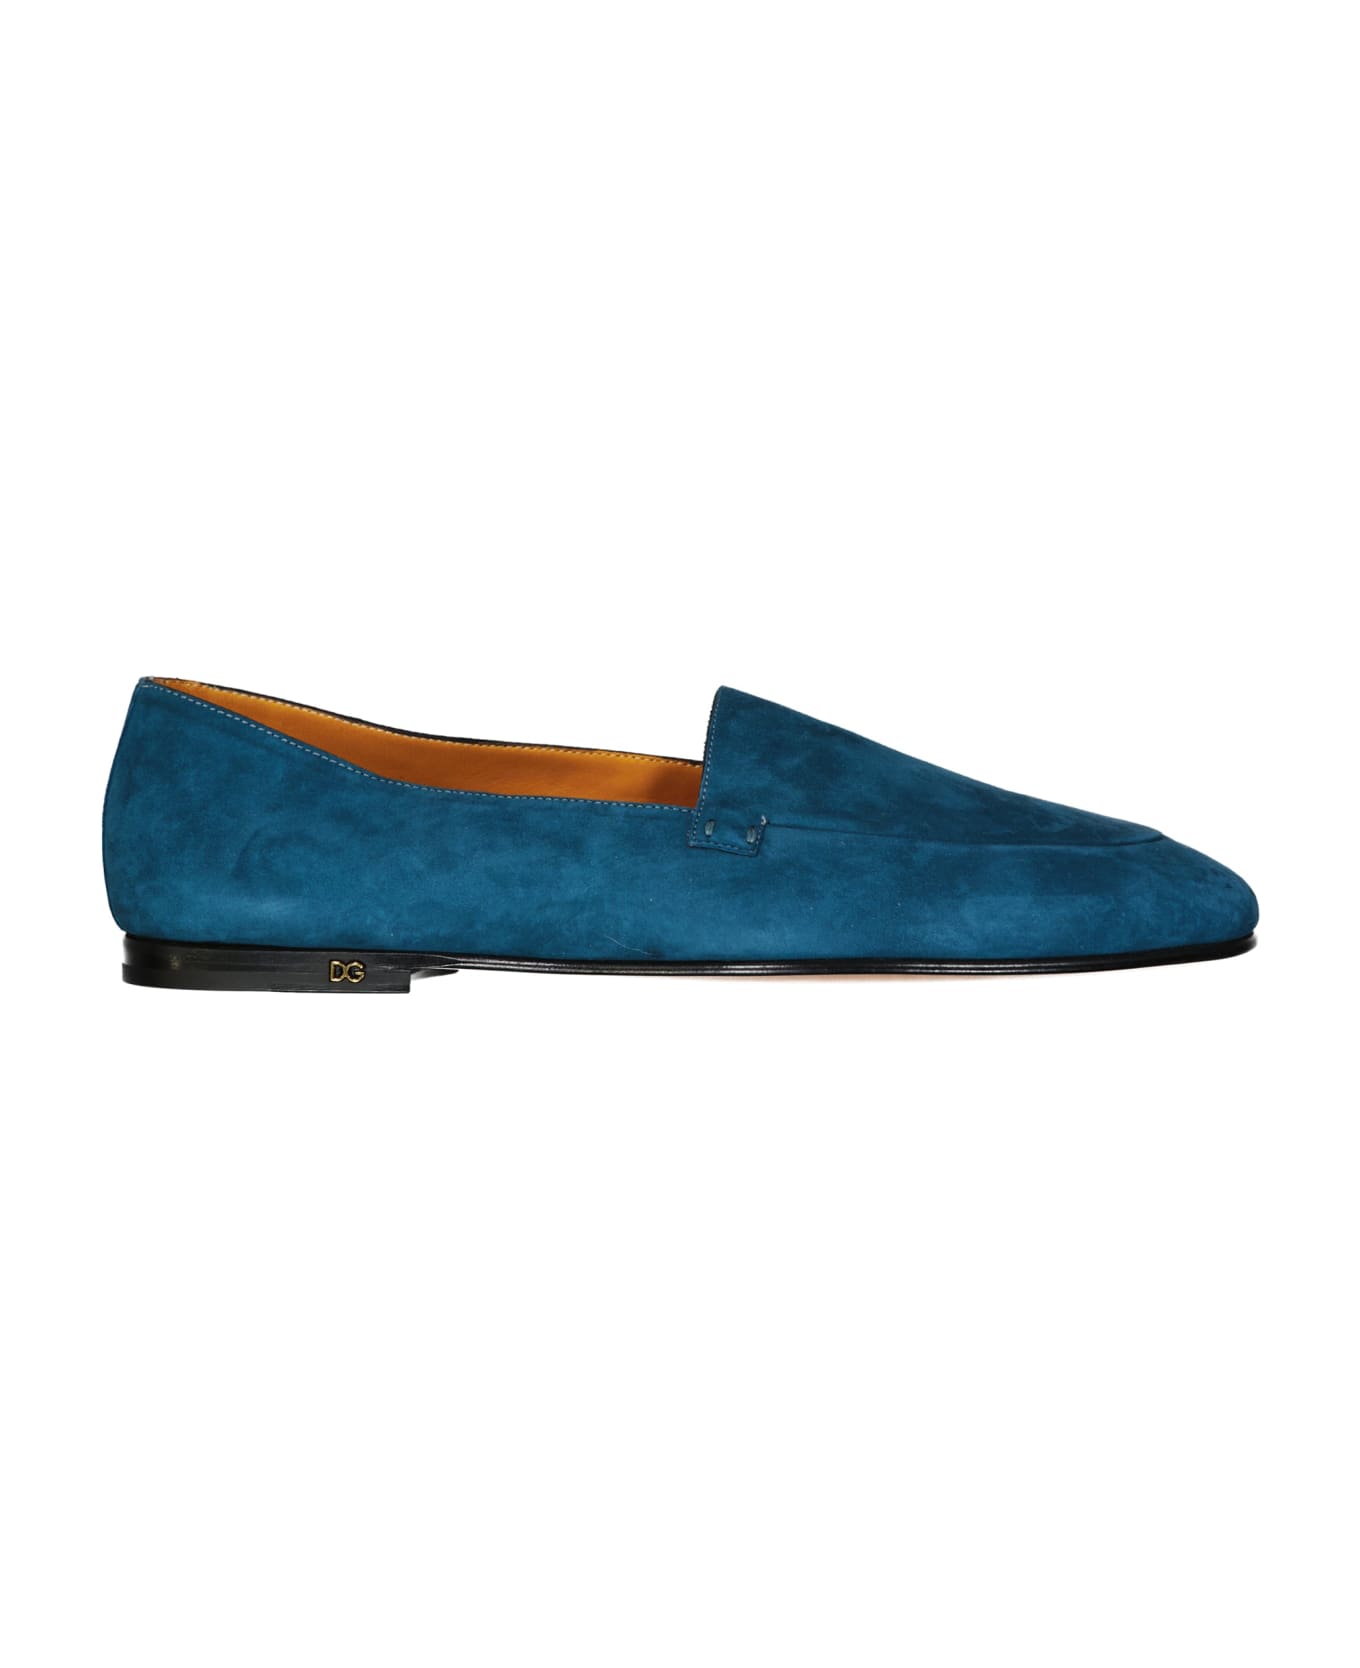 Dolce & Gabbana Suede Loafers - Blue